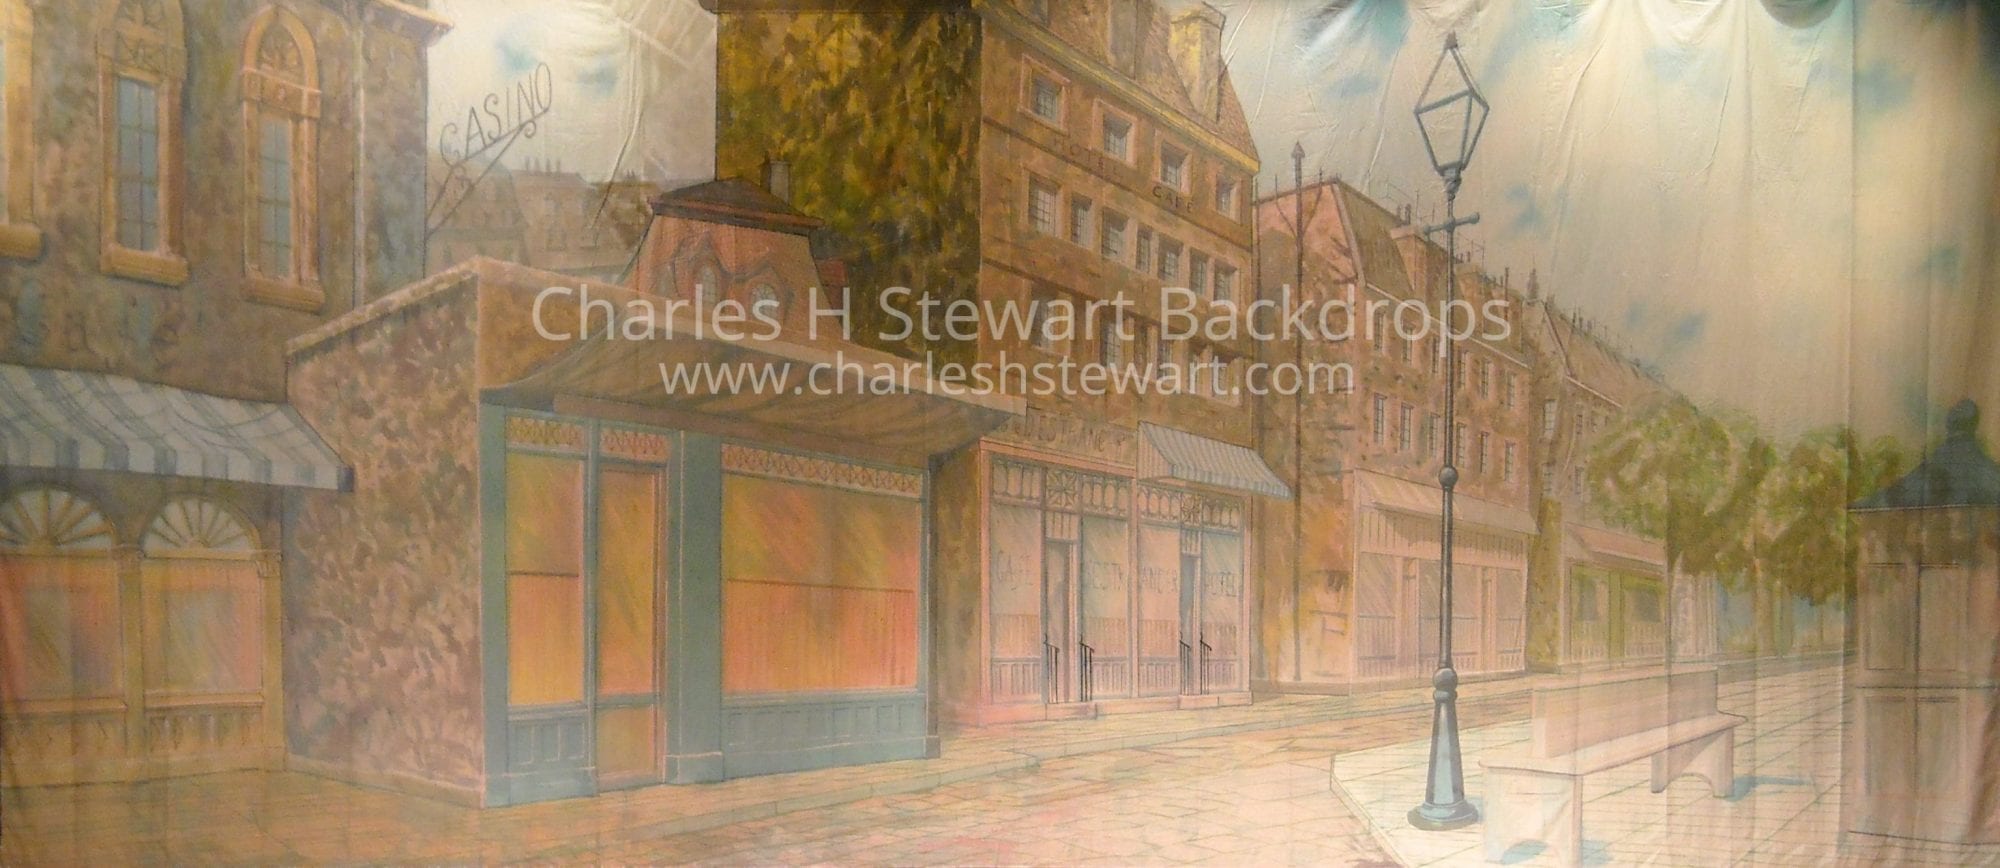 French Street Backdrop - Backdrops by Charles H. Stewart